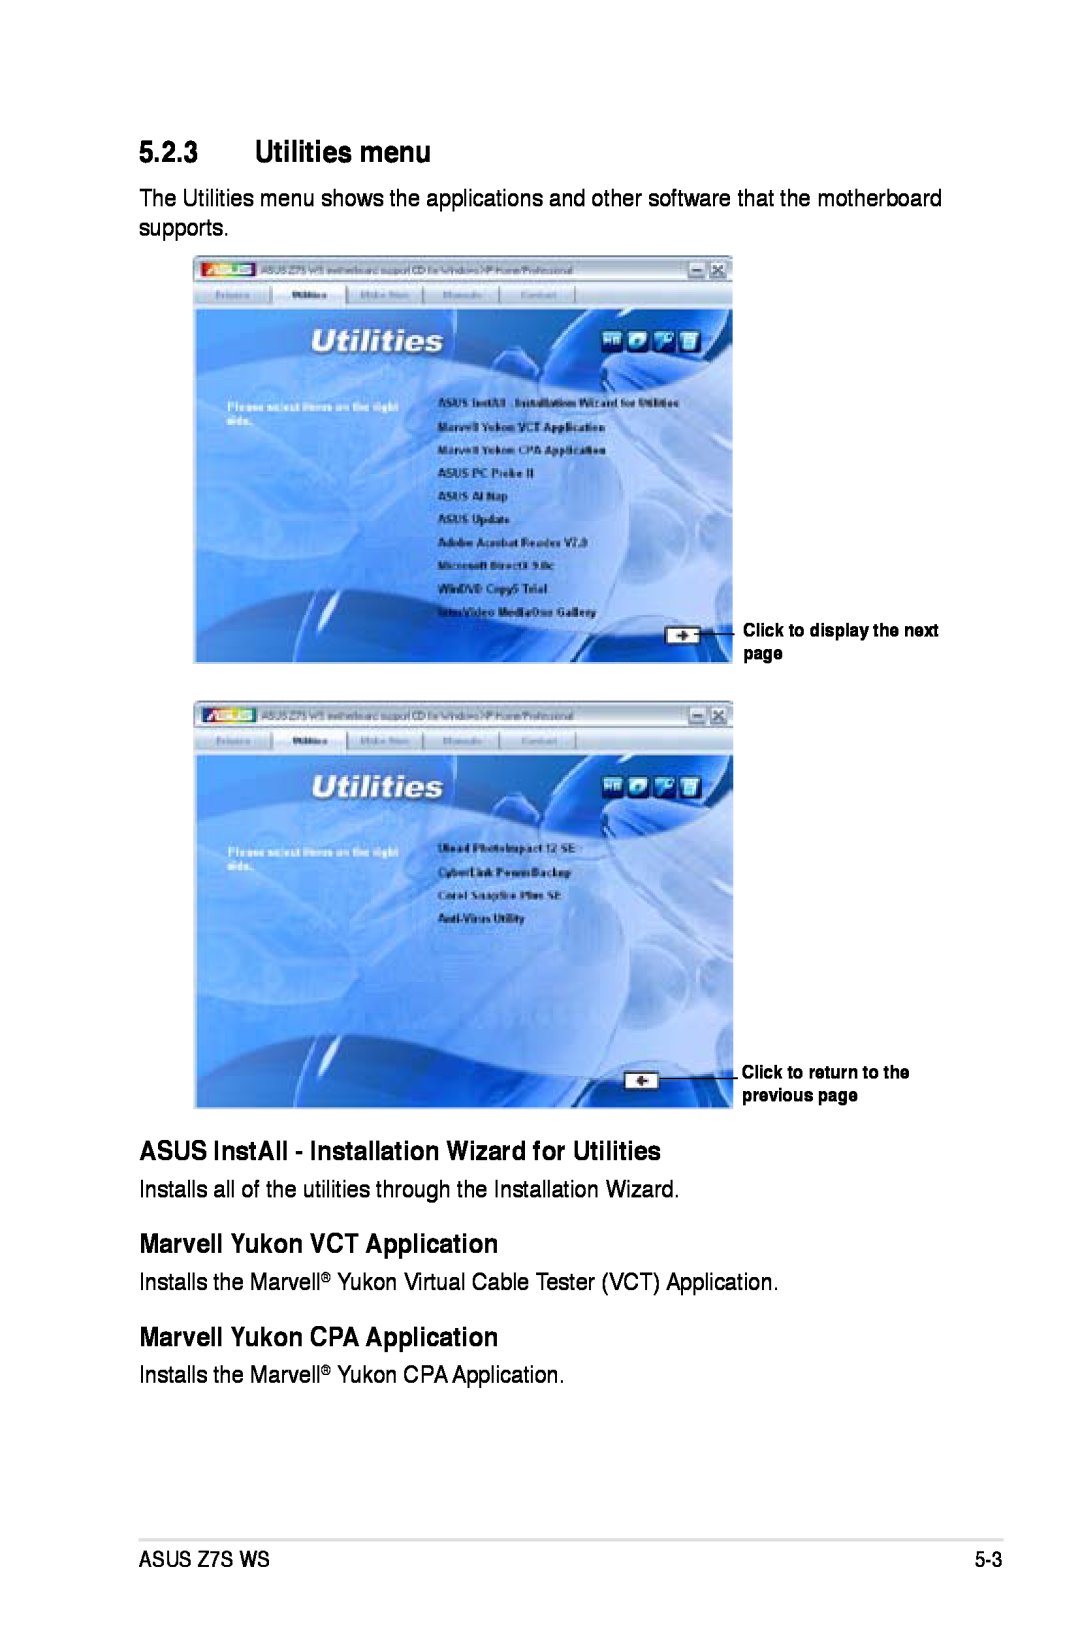 Asus Z7S WS manual Utilities menu, ASUS InstAll - Installation Wizard for Utilities, Marvell Yukon VCT Application 